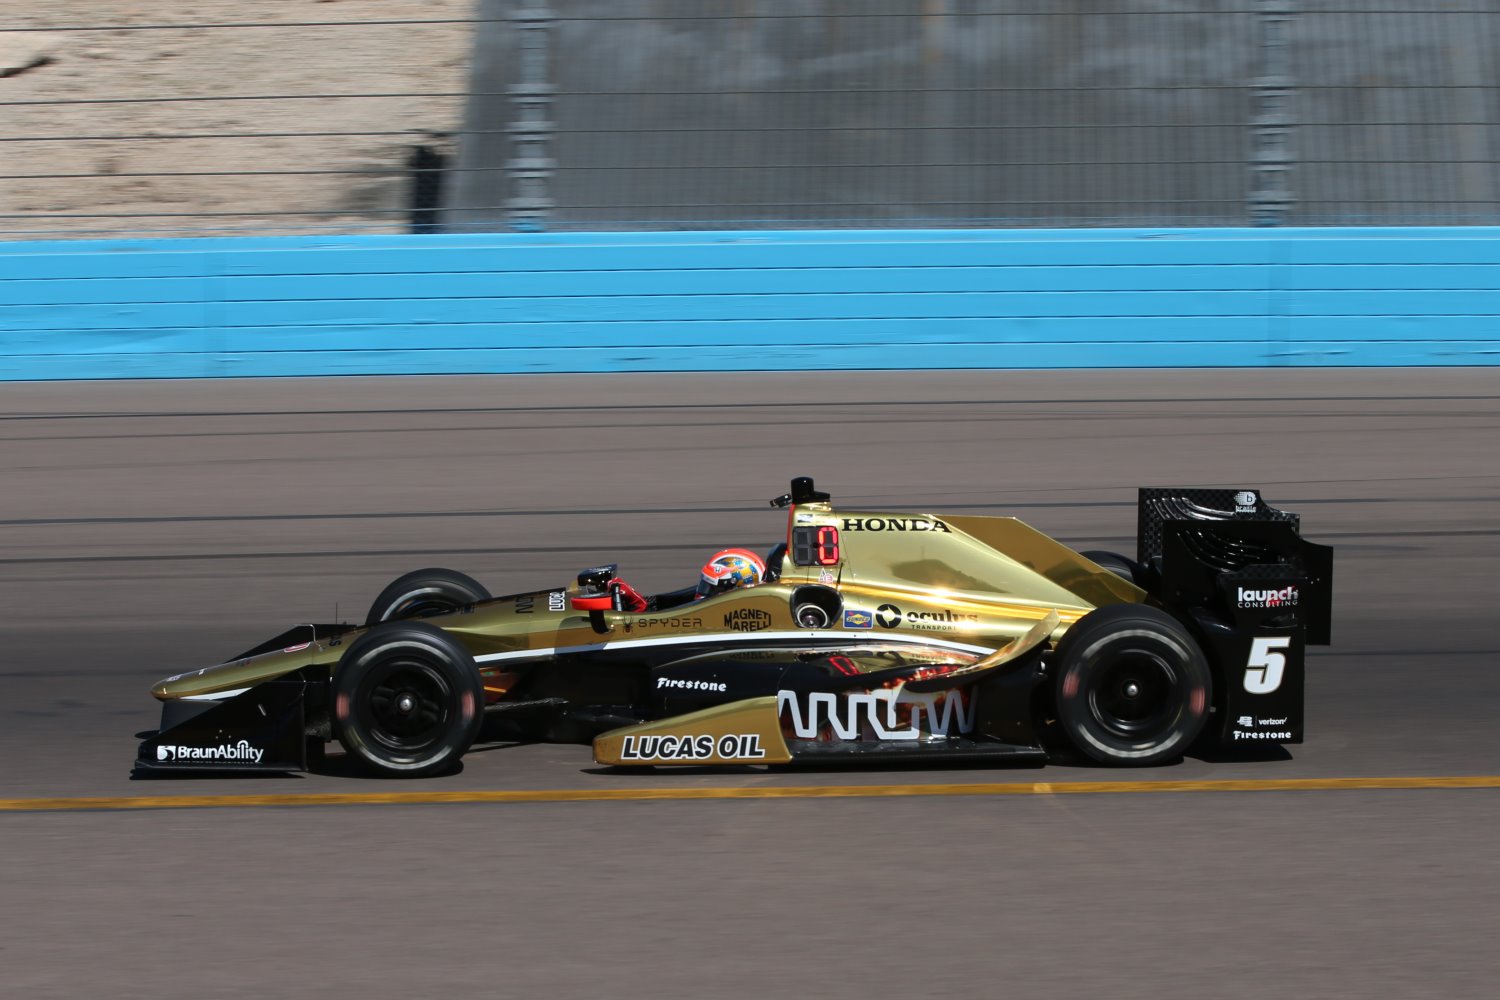 Hinchcliffe in the Arrow sponsored car testing at Phoenix